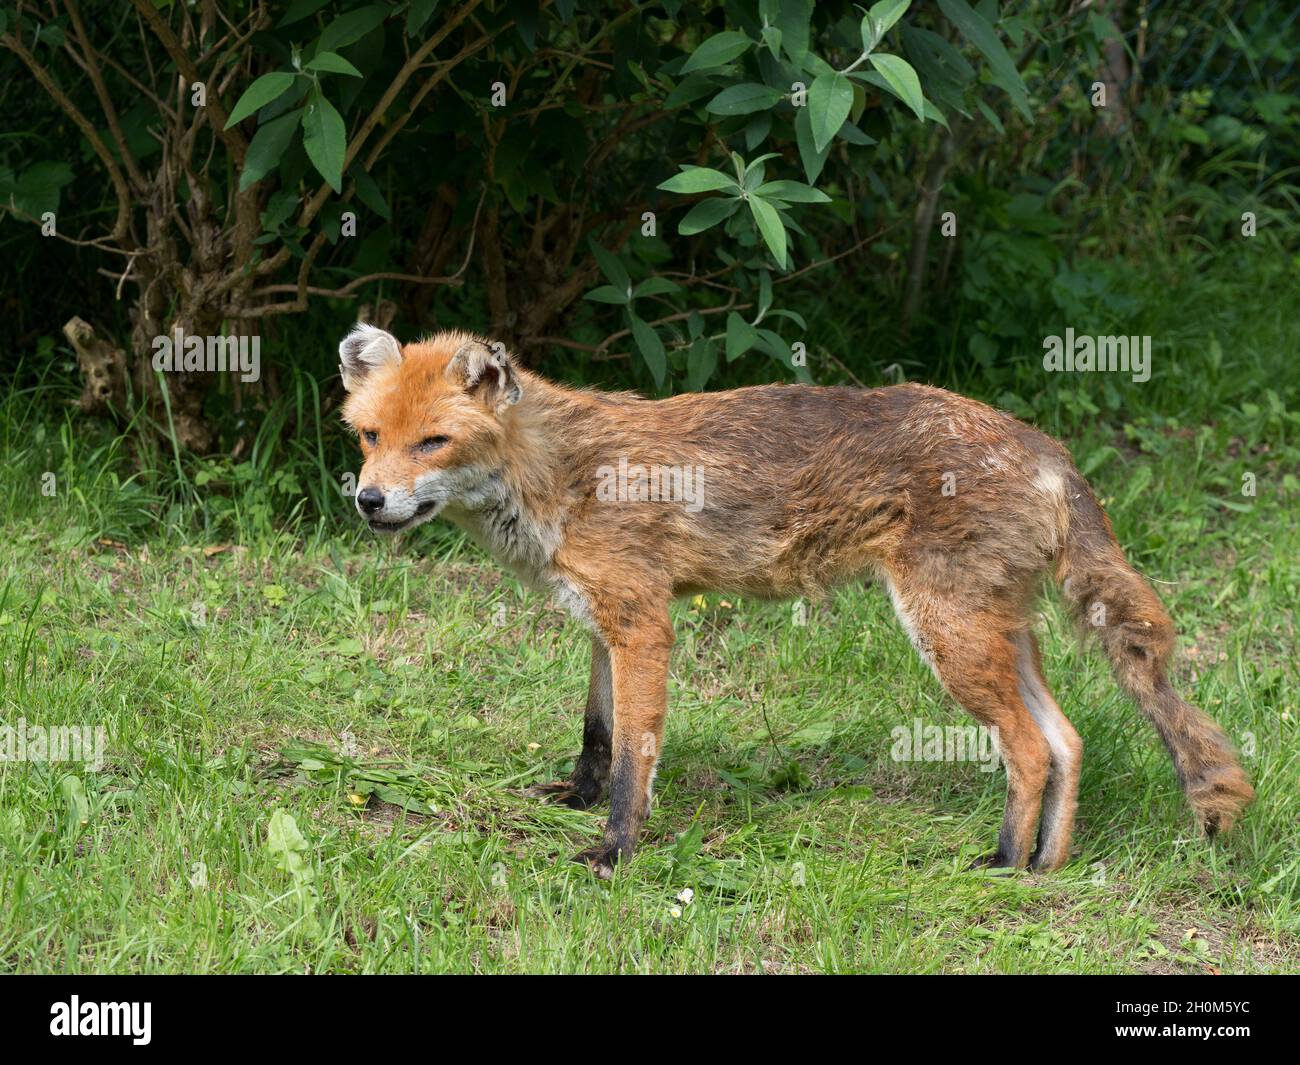 Red Fox, Vulpes vulpes, single adult male, standing in urban garden during day. Lea Valley, Essex, UK. Stock Photo